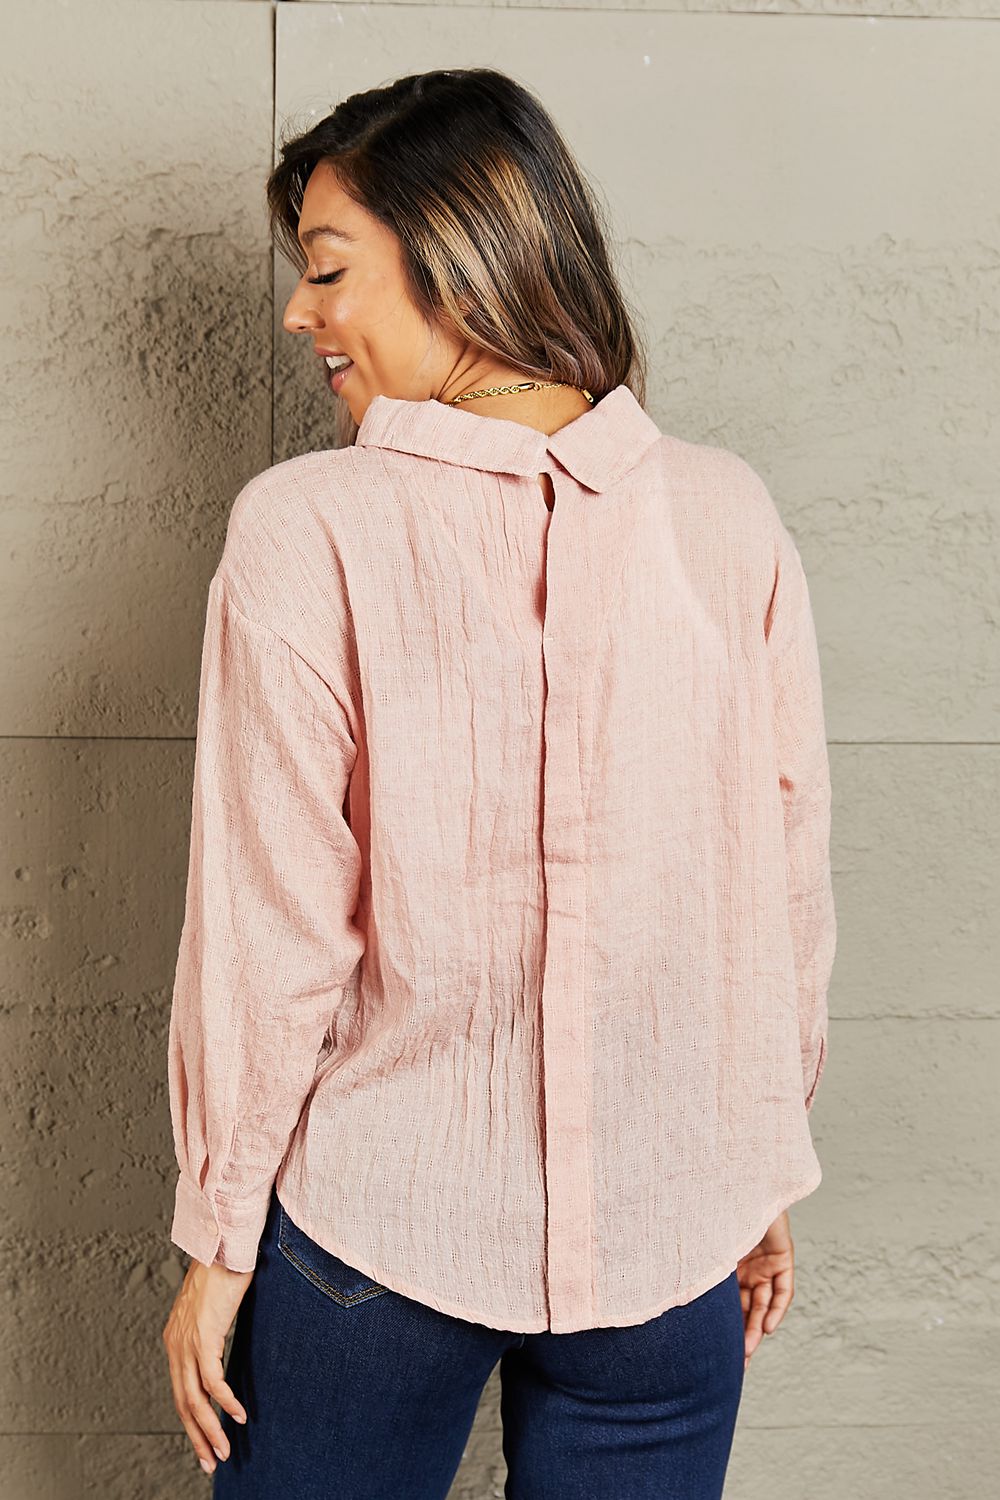 Take Me Out Lightweight Button Down Top - Women’s Clothing & Accessories - Shirts & Tops - 2 - 2024